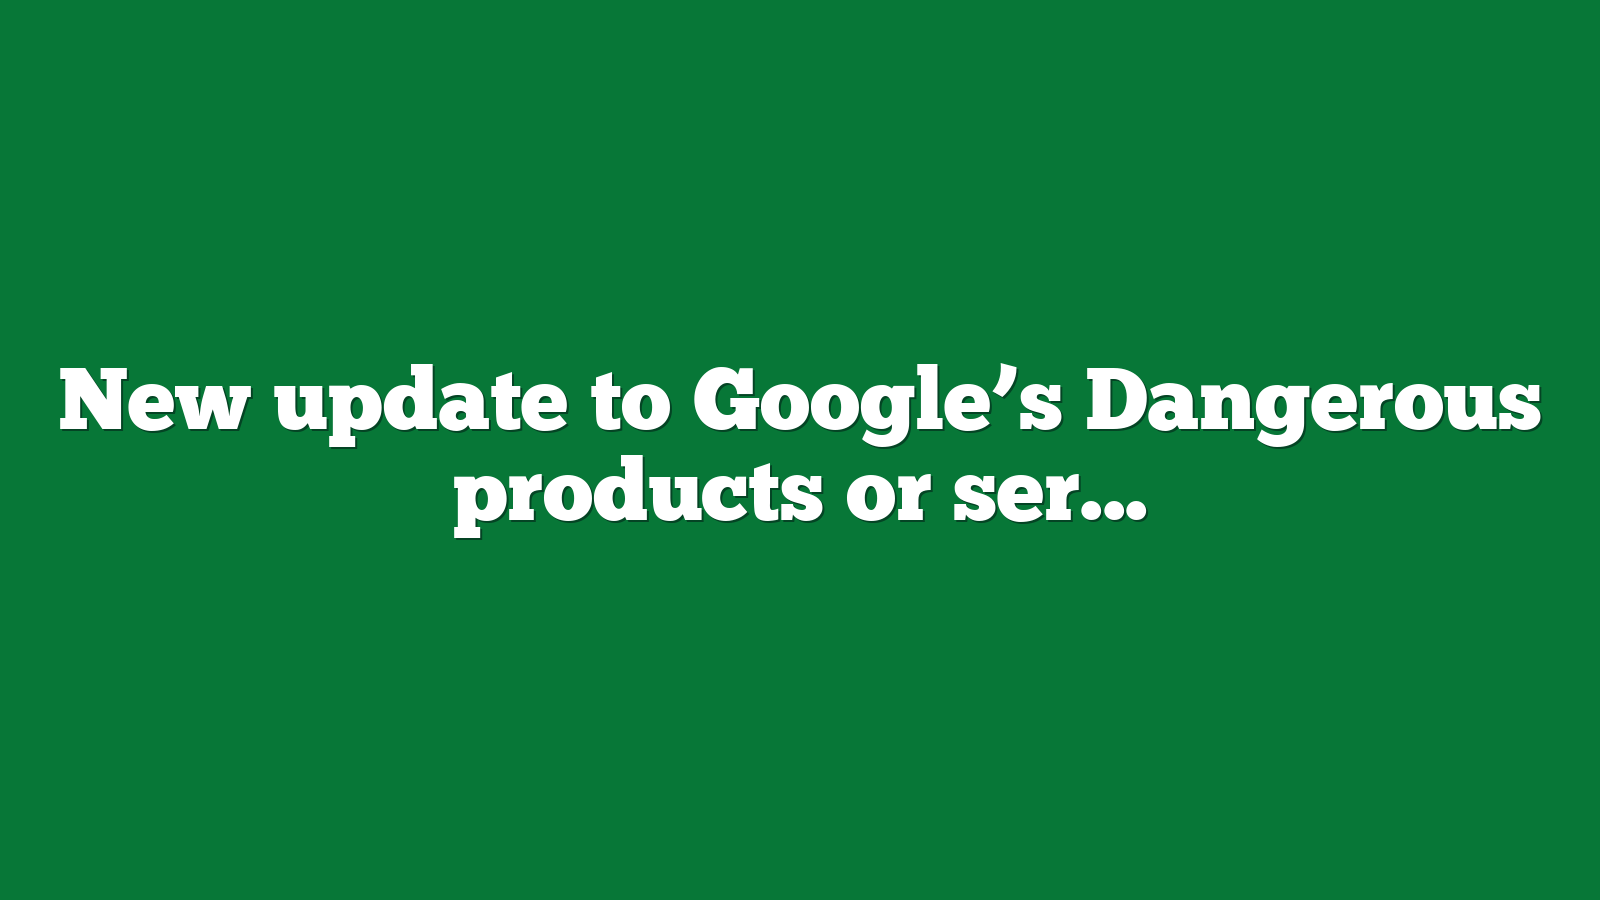 New update to Google’s Dangerous products or services policy